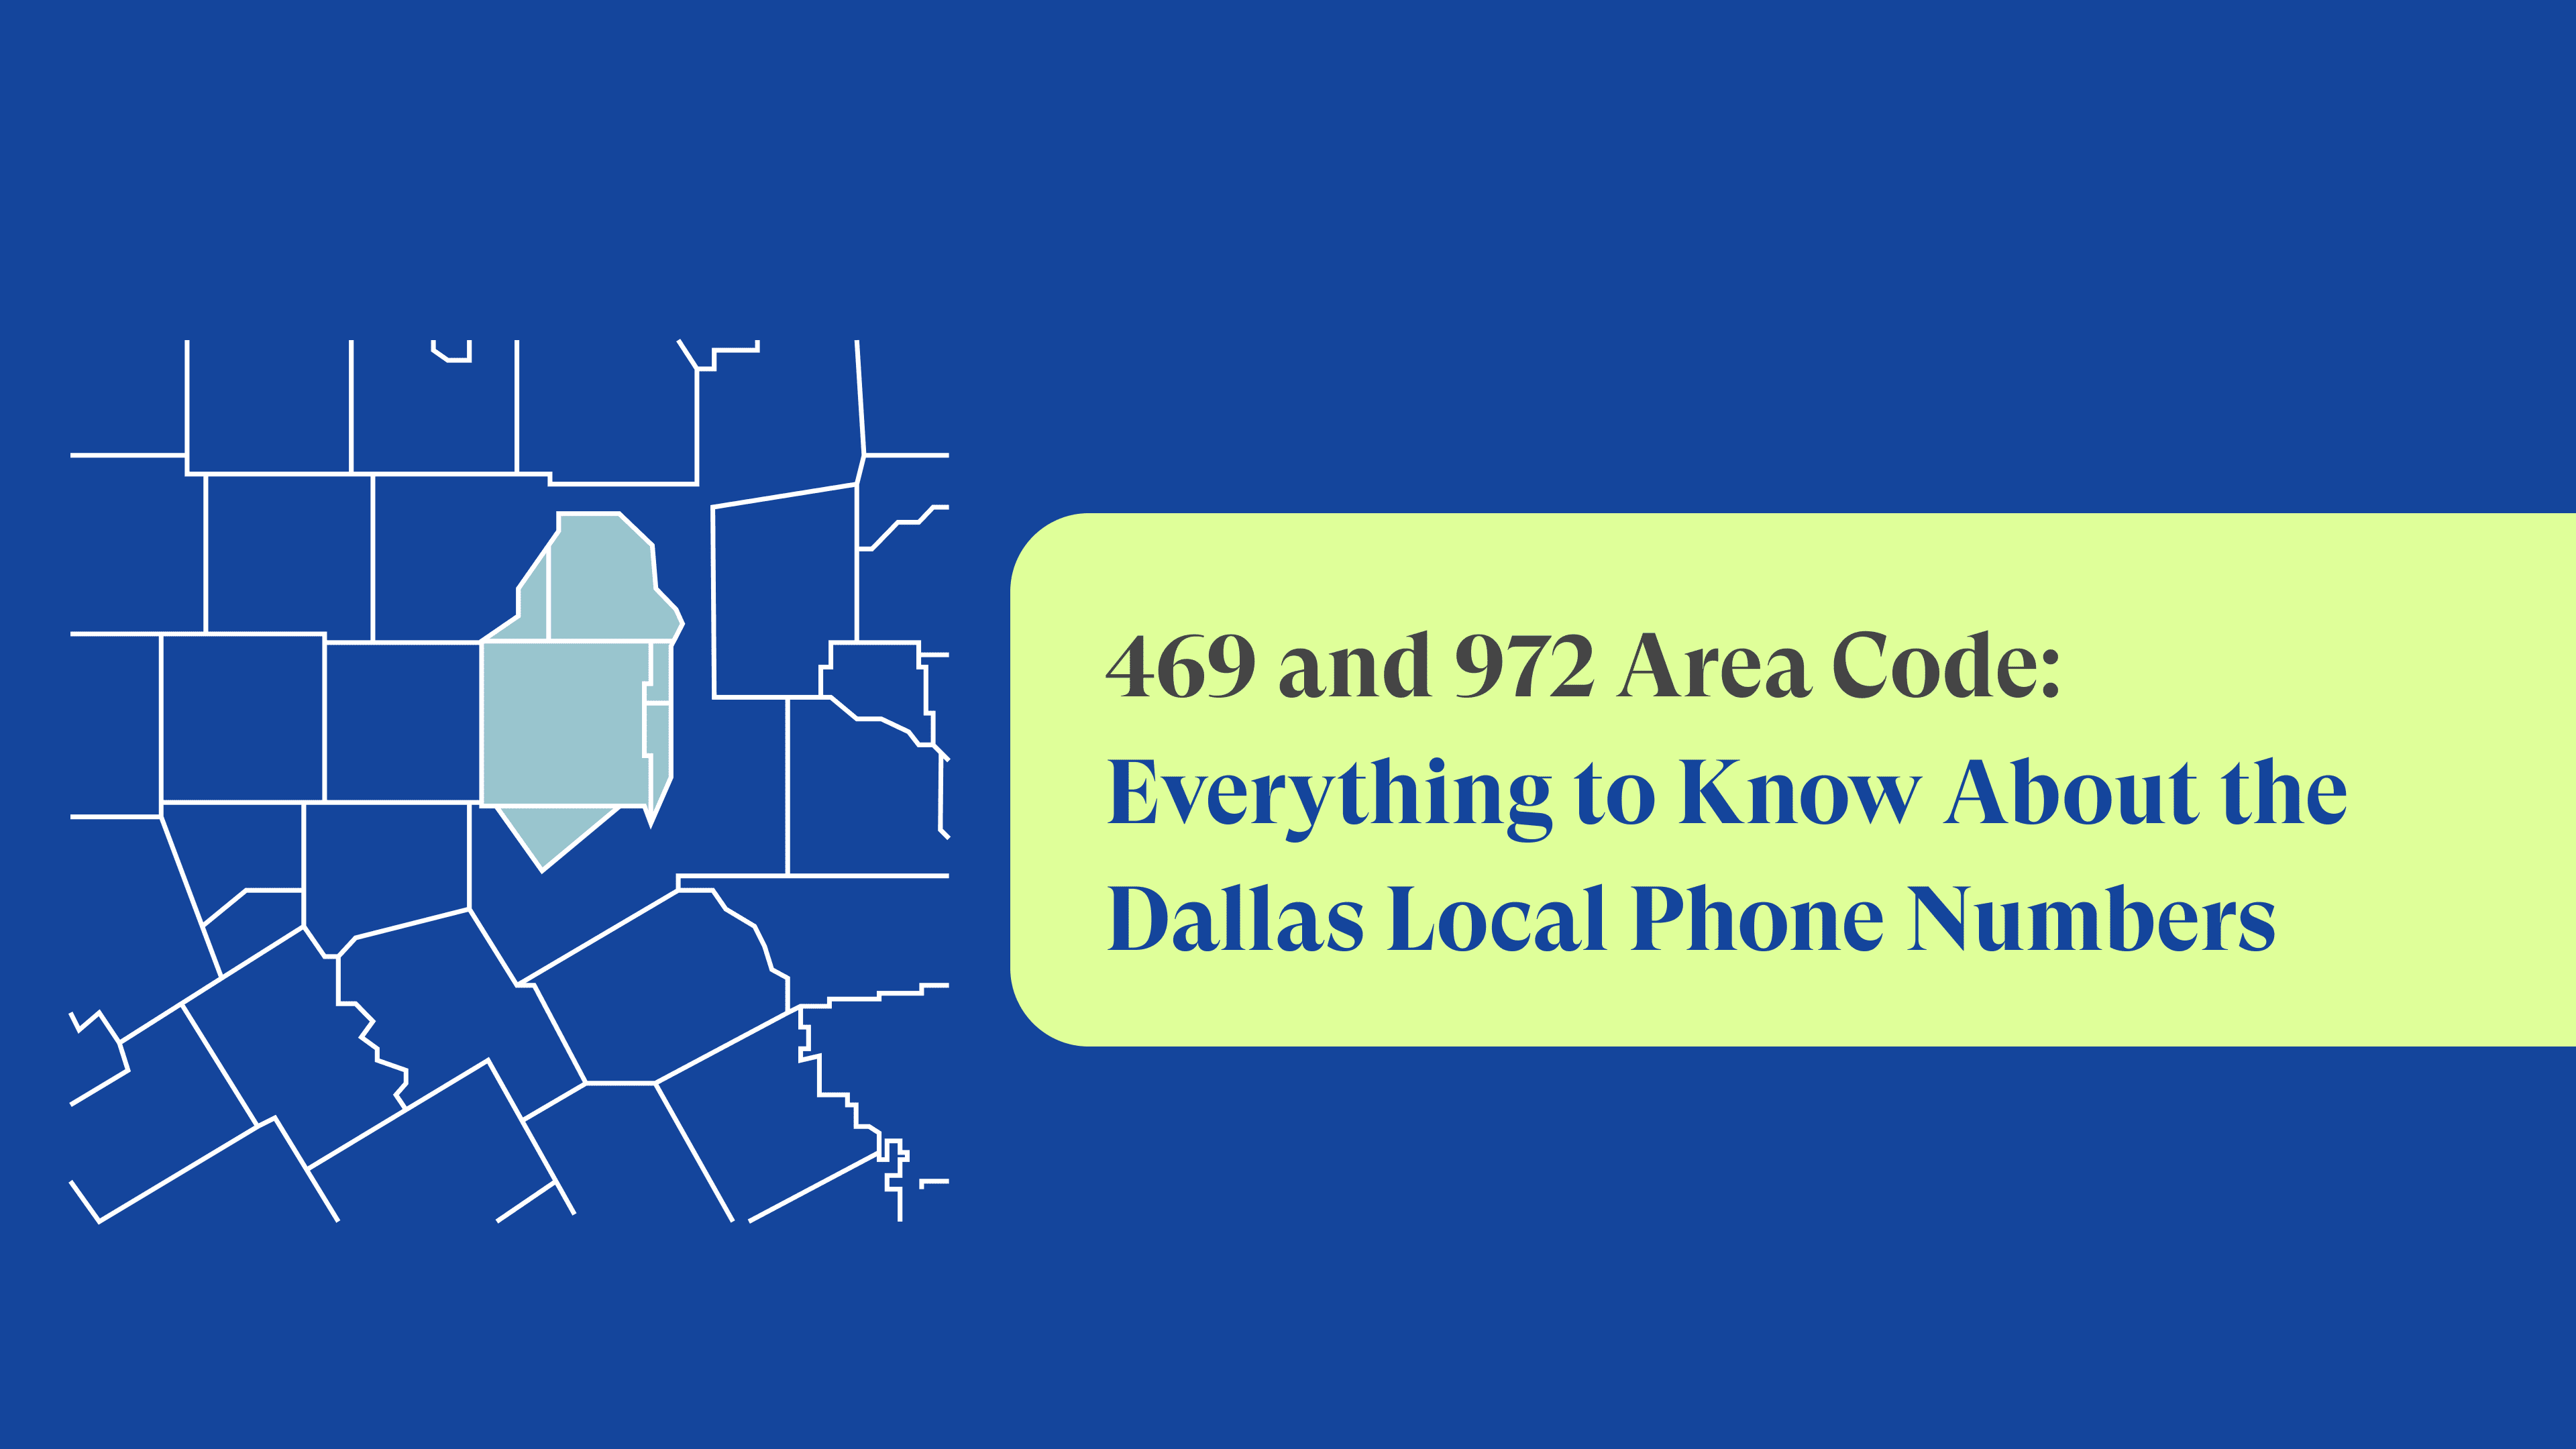 Area Codes 469 and 972: Dallas, Texas Local Phone Numbers